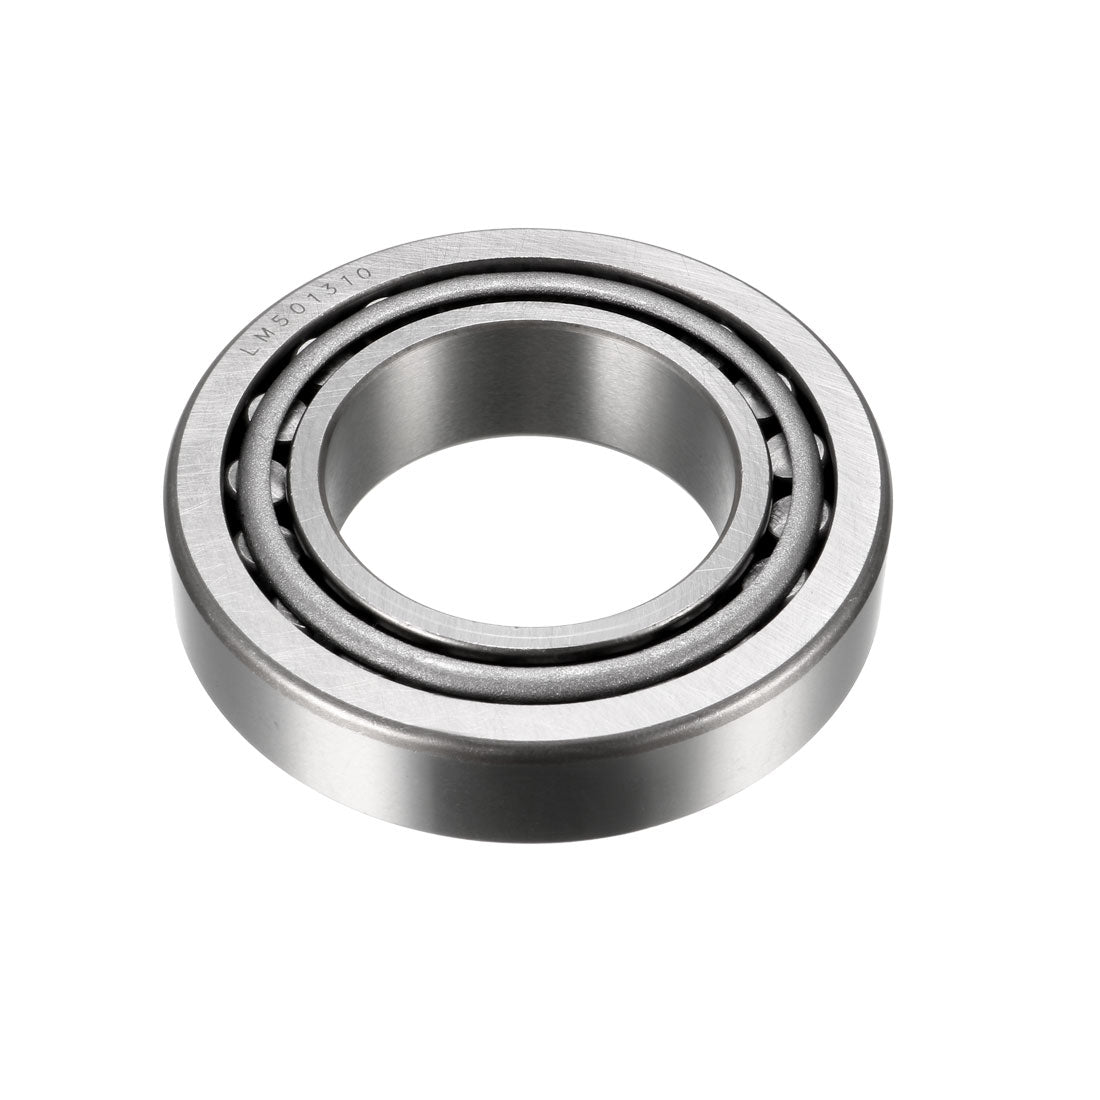 Uxcell Uxcell LM12748/LM12710 Tapered Roller Bearing Cone and Cup Set 0.84" Bore 1.78" OD 2pcs